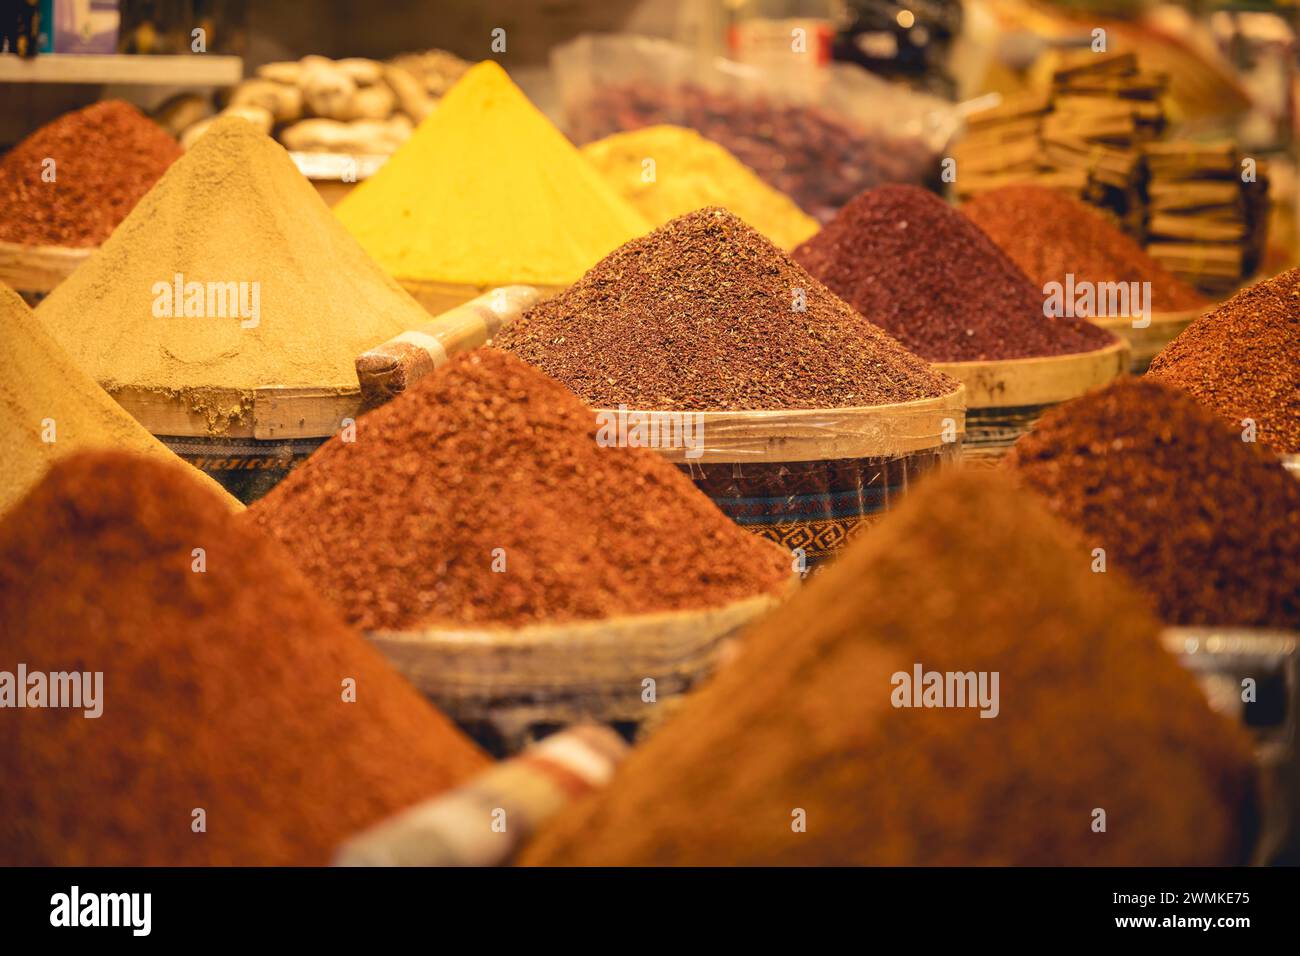 Spices for sale at The Spice Bazaar; Istanbul, Turkey Stock Photo